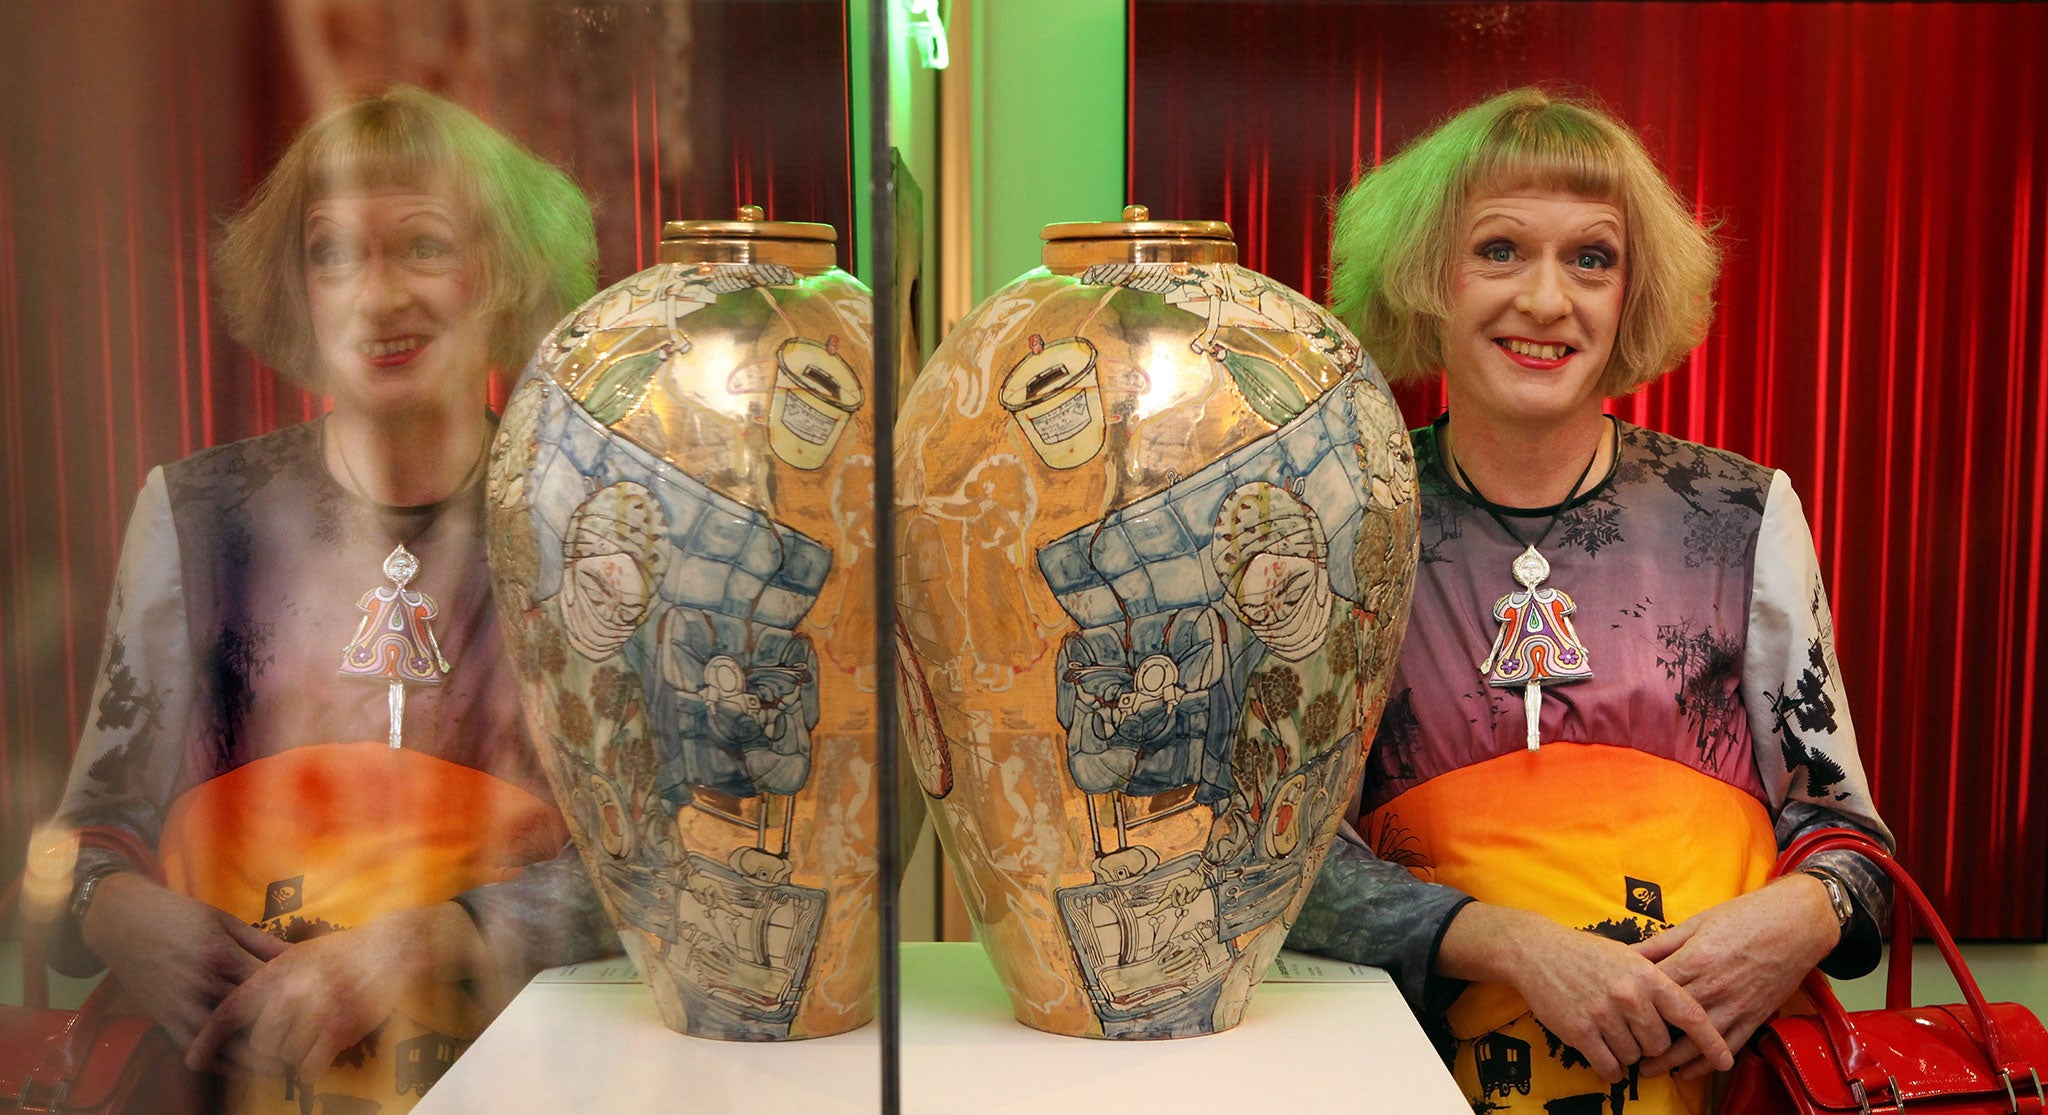 Cheeky chappie approach: Grayson Perry poses with his artwork in 2009